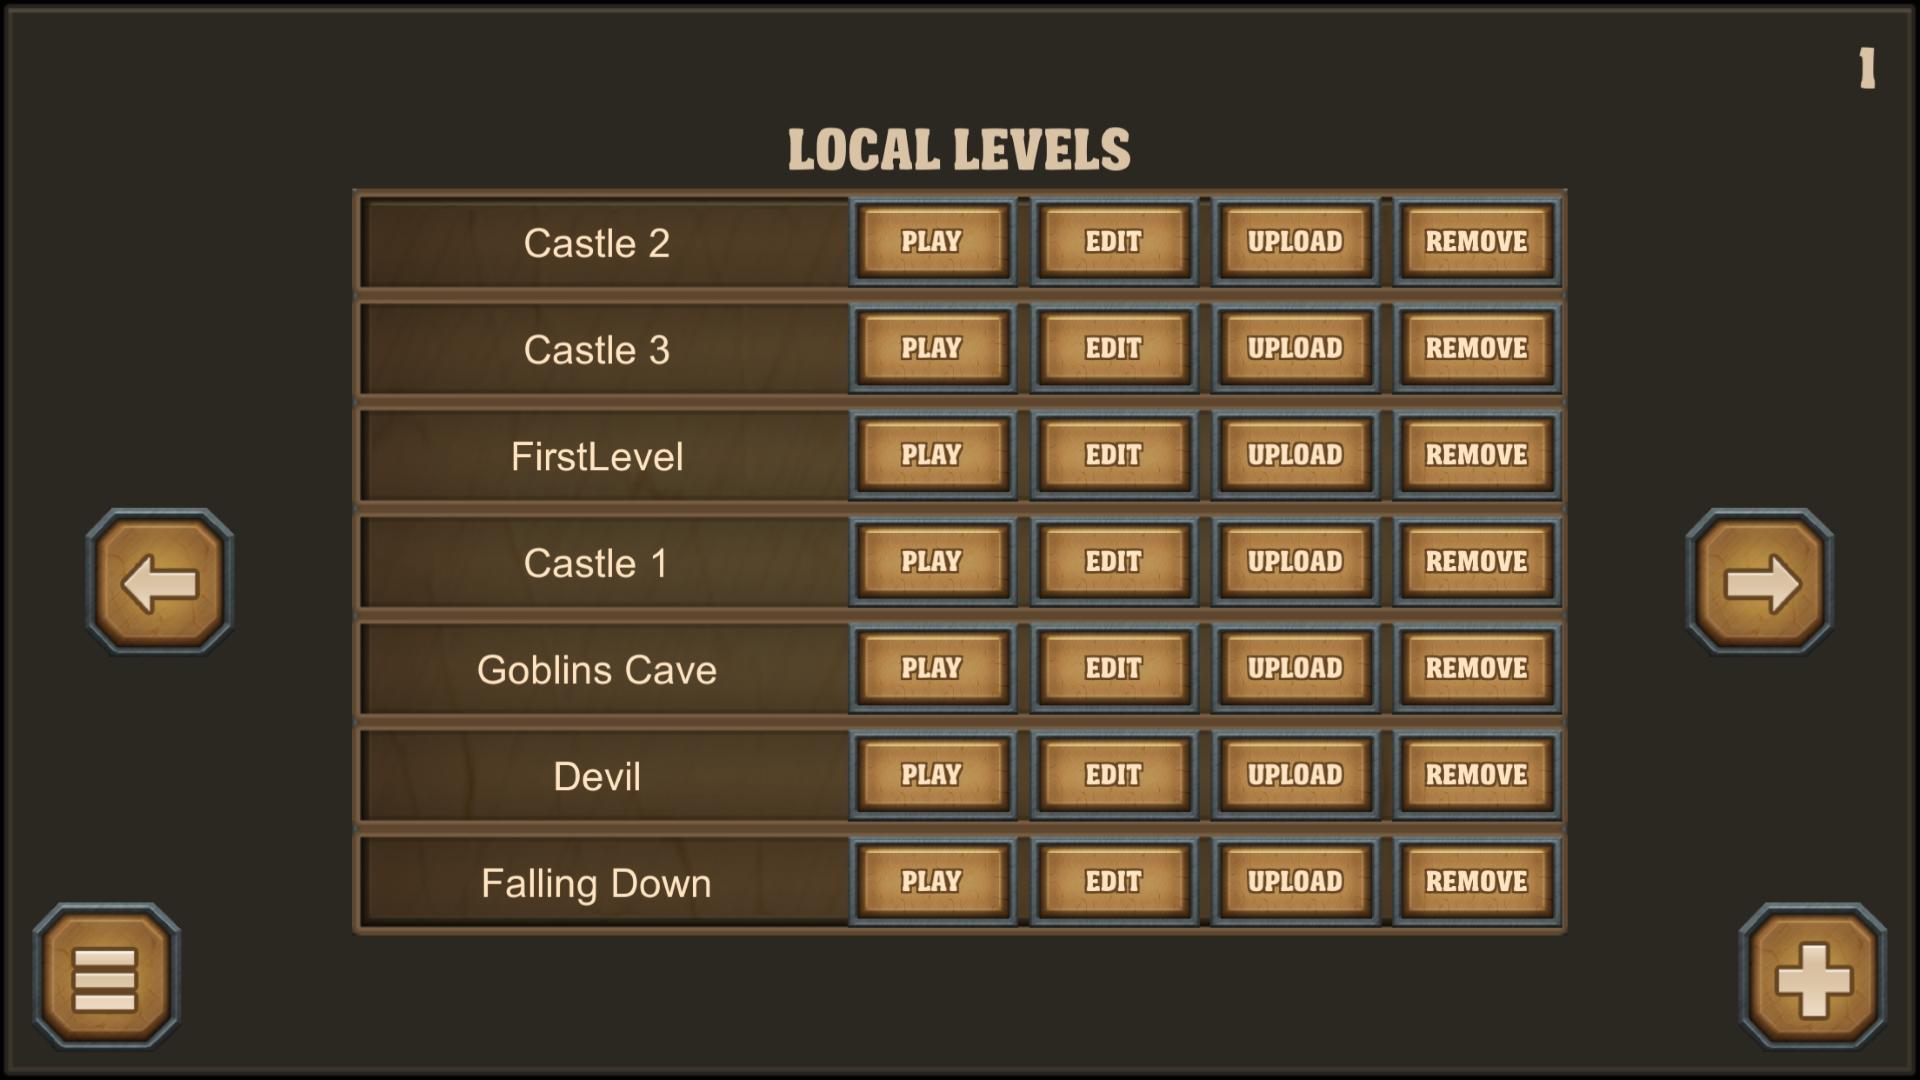 Epic Game Maker Create and Share Your Levels 1.9 Screenshot 21